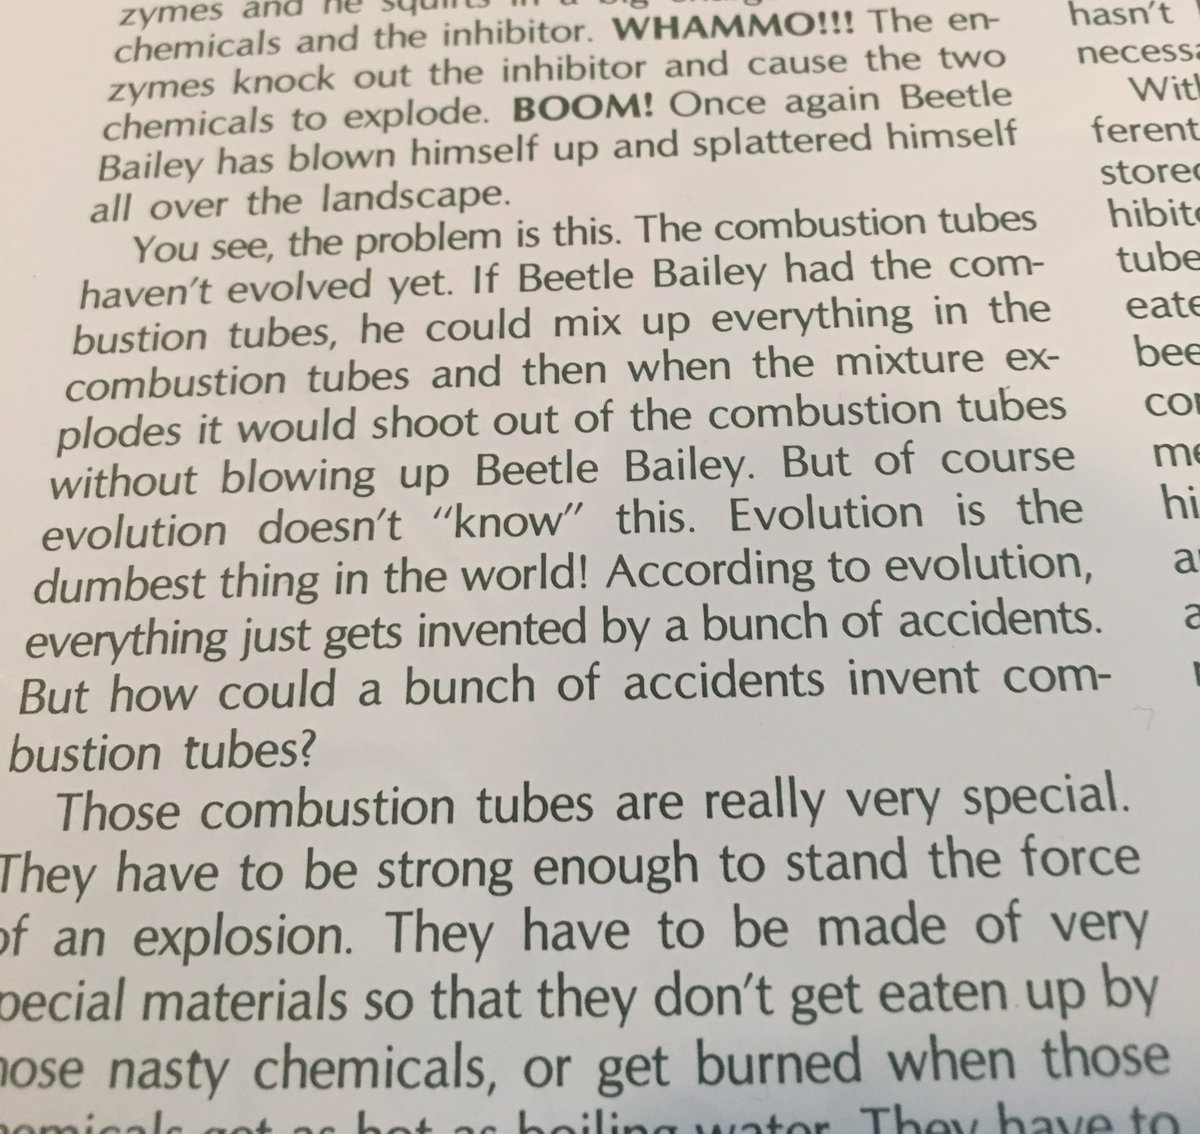 76. Anyway, in all this discussion of supposed irreducible complexity, Gish hits on one fundamental point again and again in a very telling way--the idea that evolution suggests "everything just gets invented by a bunch of accidents." He is clearly threatened by this notion.